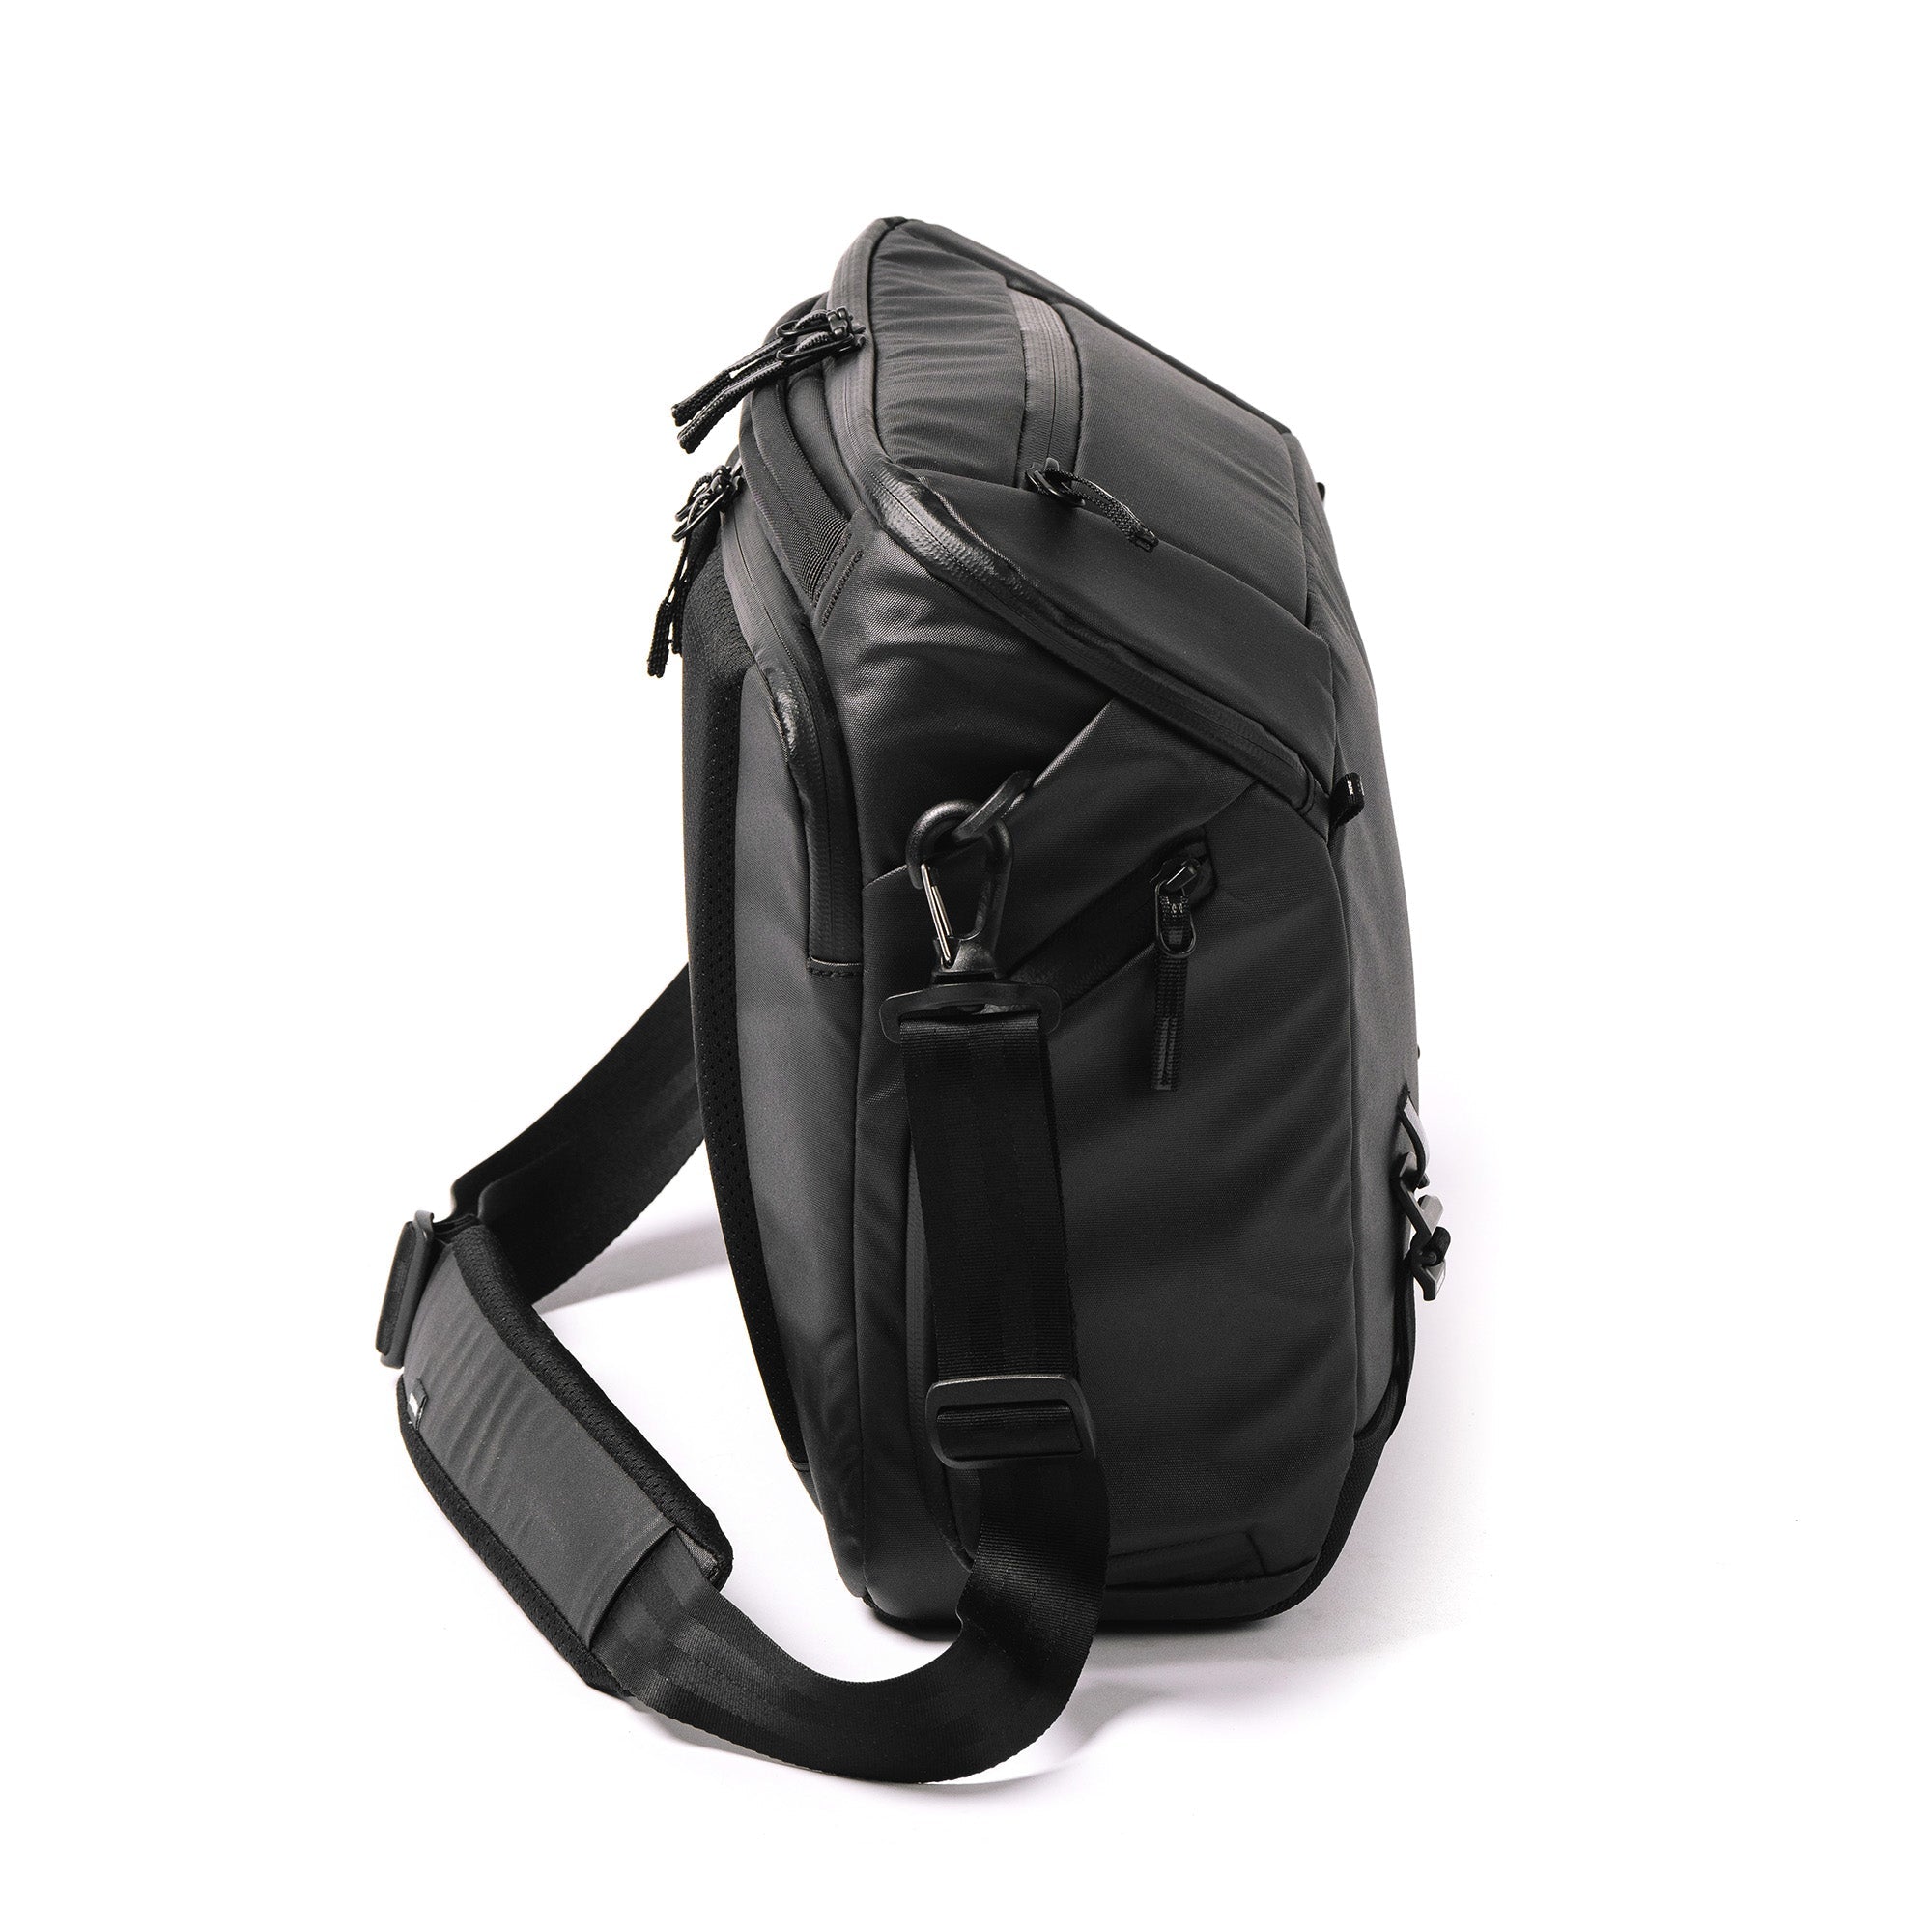 Compact, lightweight and entirely padded, the Nanuk N-PVD messenger bag